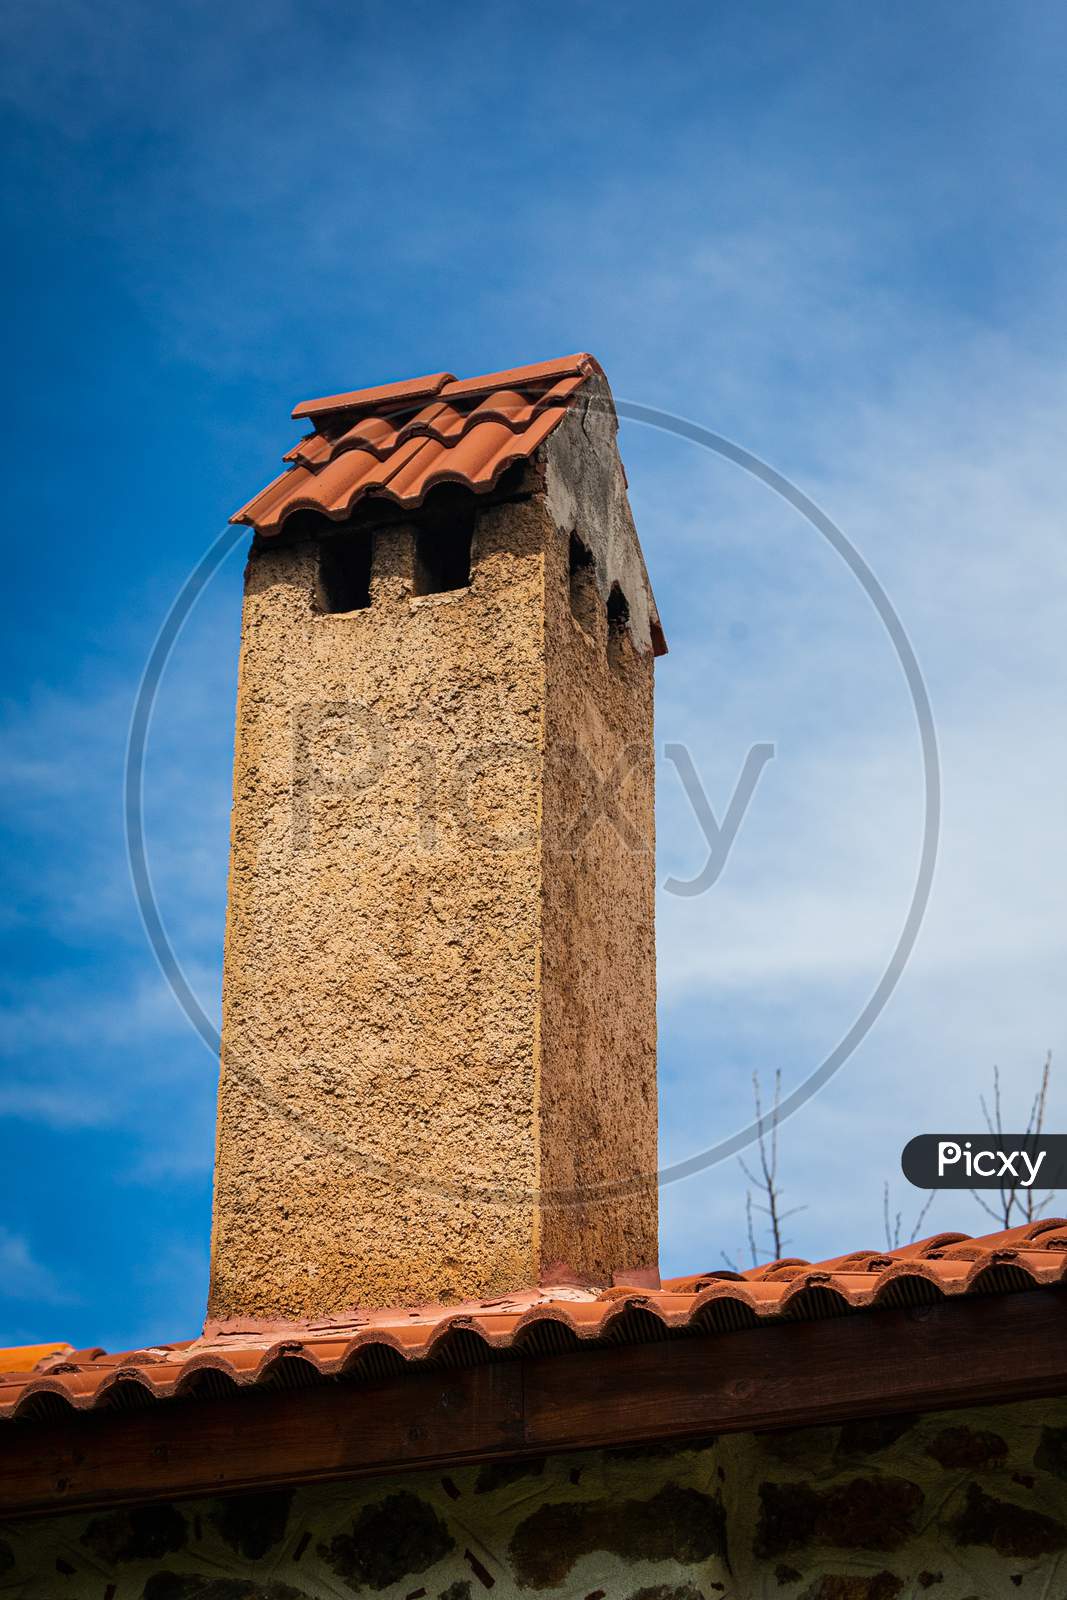 Stone Tall Chimney With Tiles On The Roof Of A Country House Against The Blue Sky